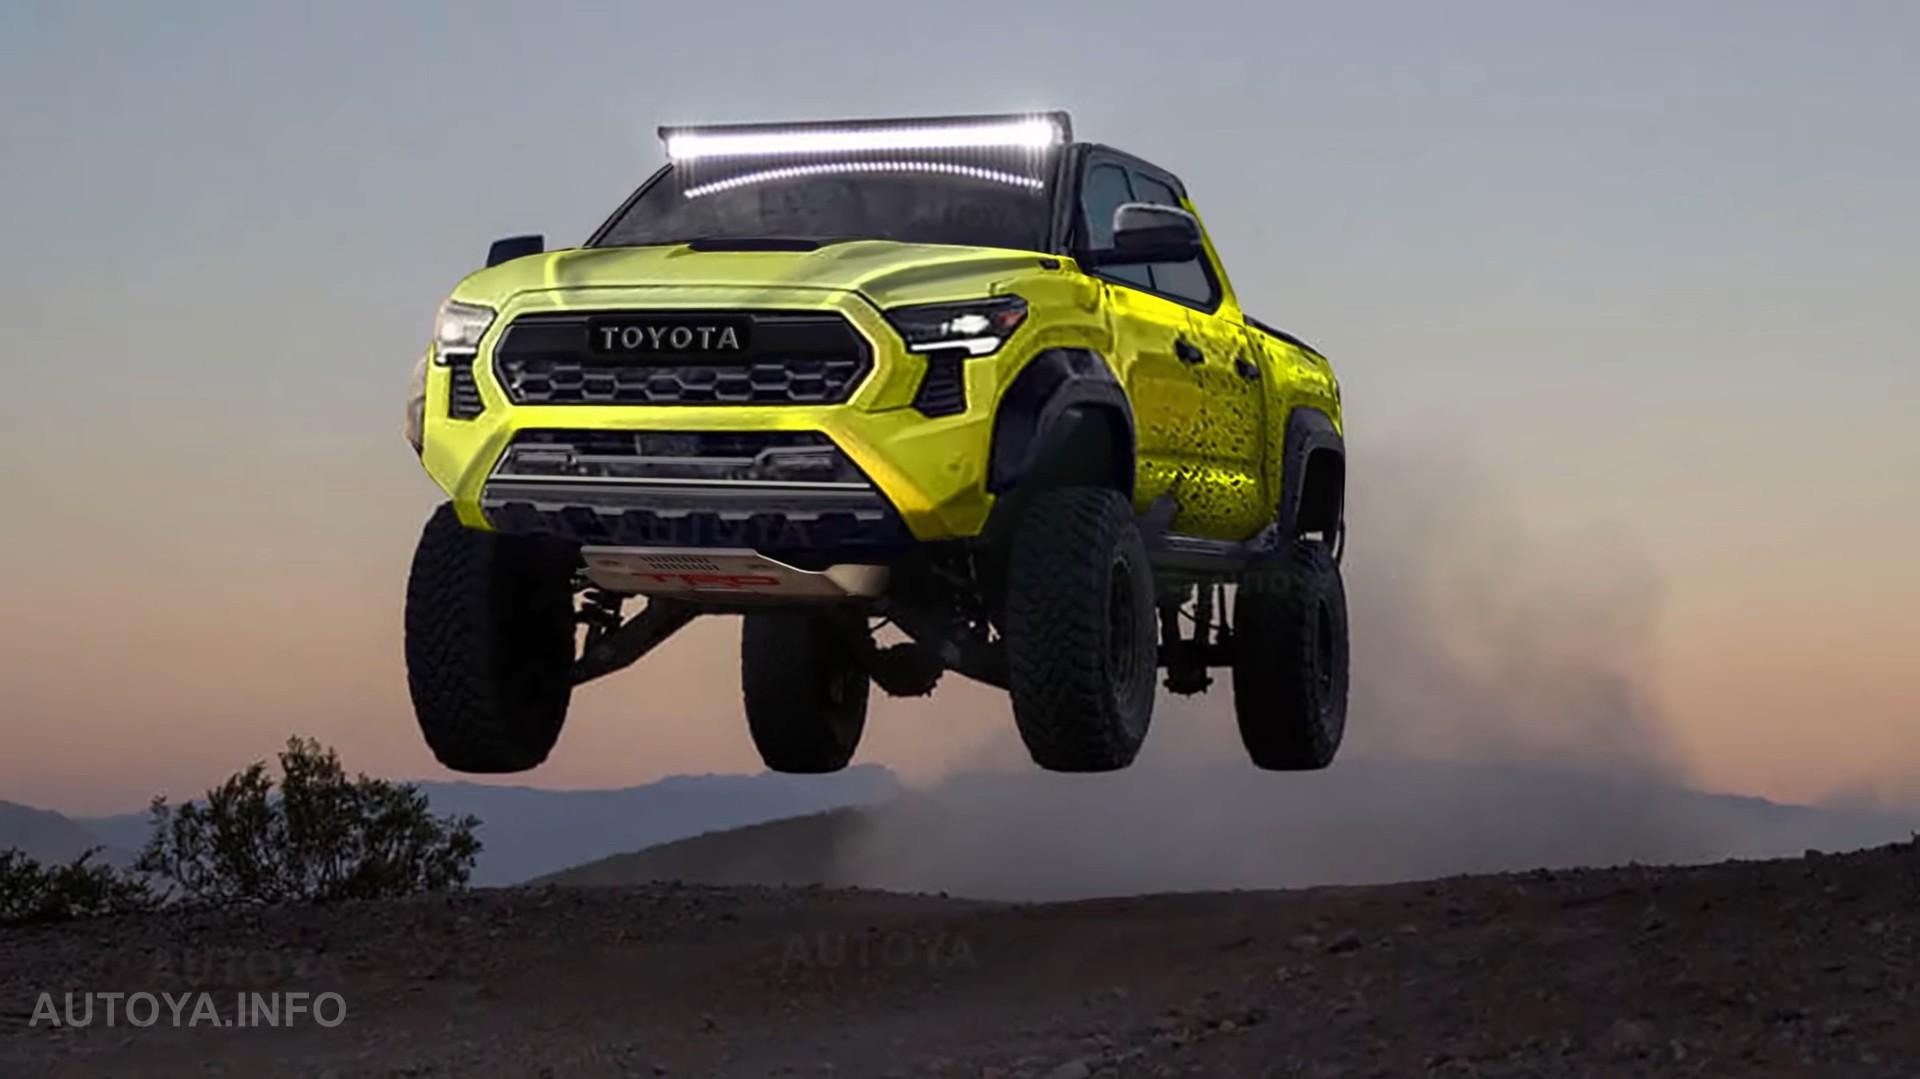 Toyota Taa Trd Pro Jumps Out Of Cgi Shadows Just Before